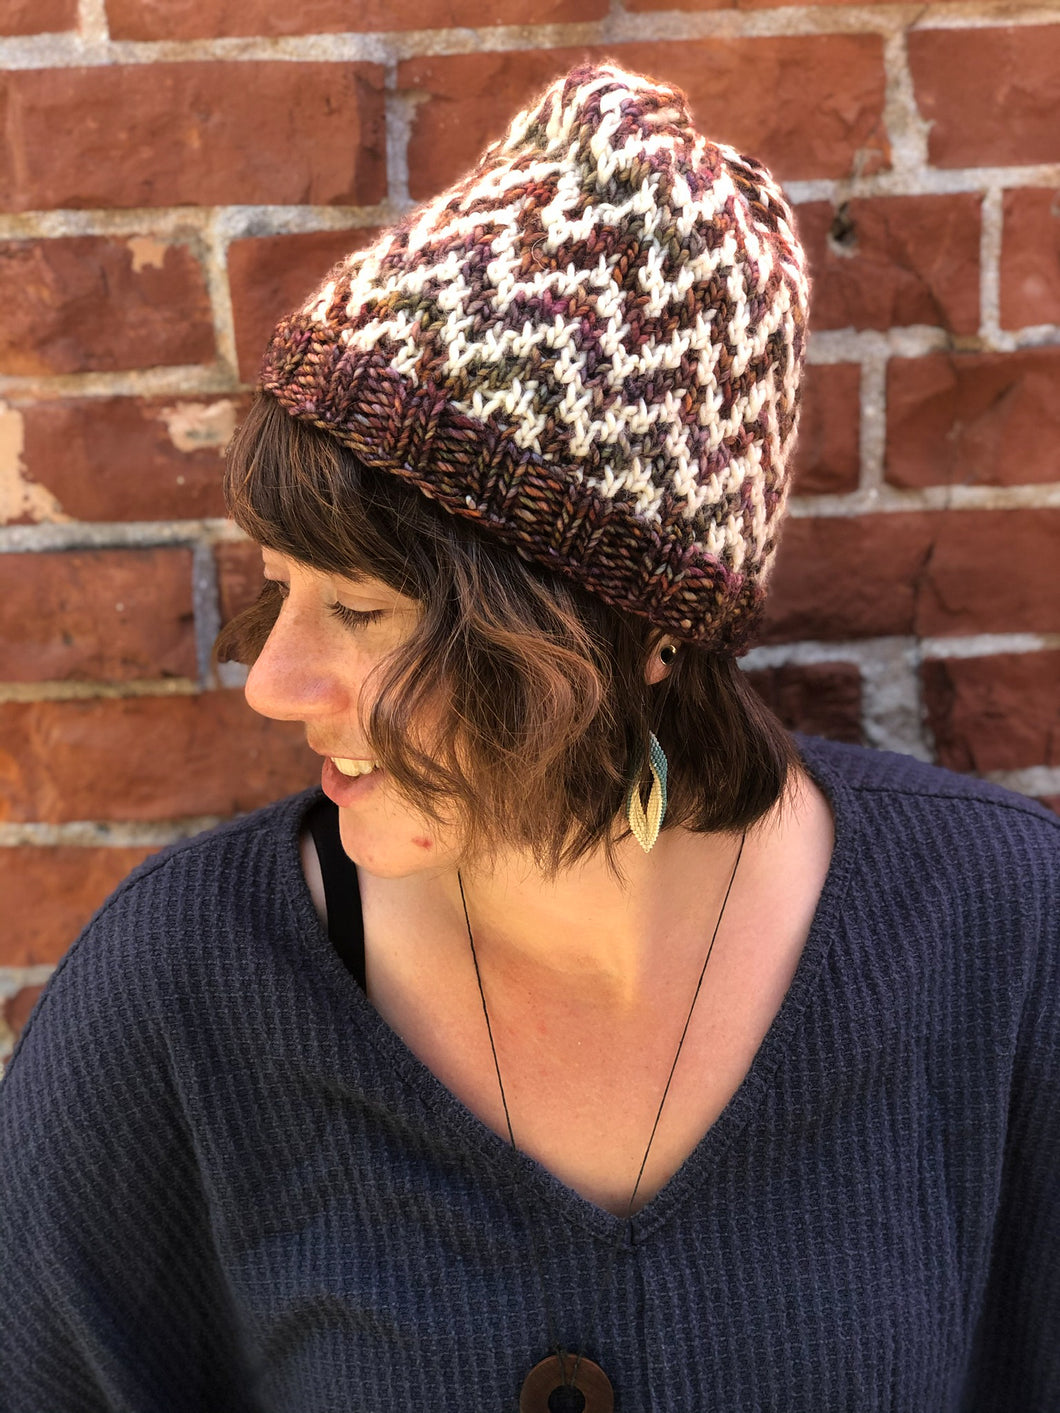 The Find Your Way Beanie has a chevron stripe pattern in two colors.  It is shown here on a model in white and brown.